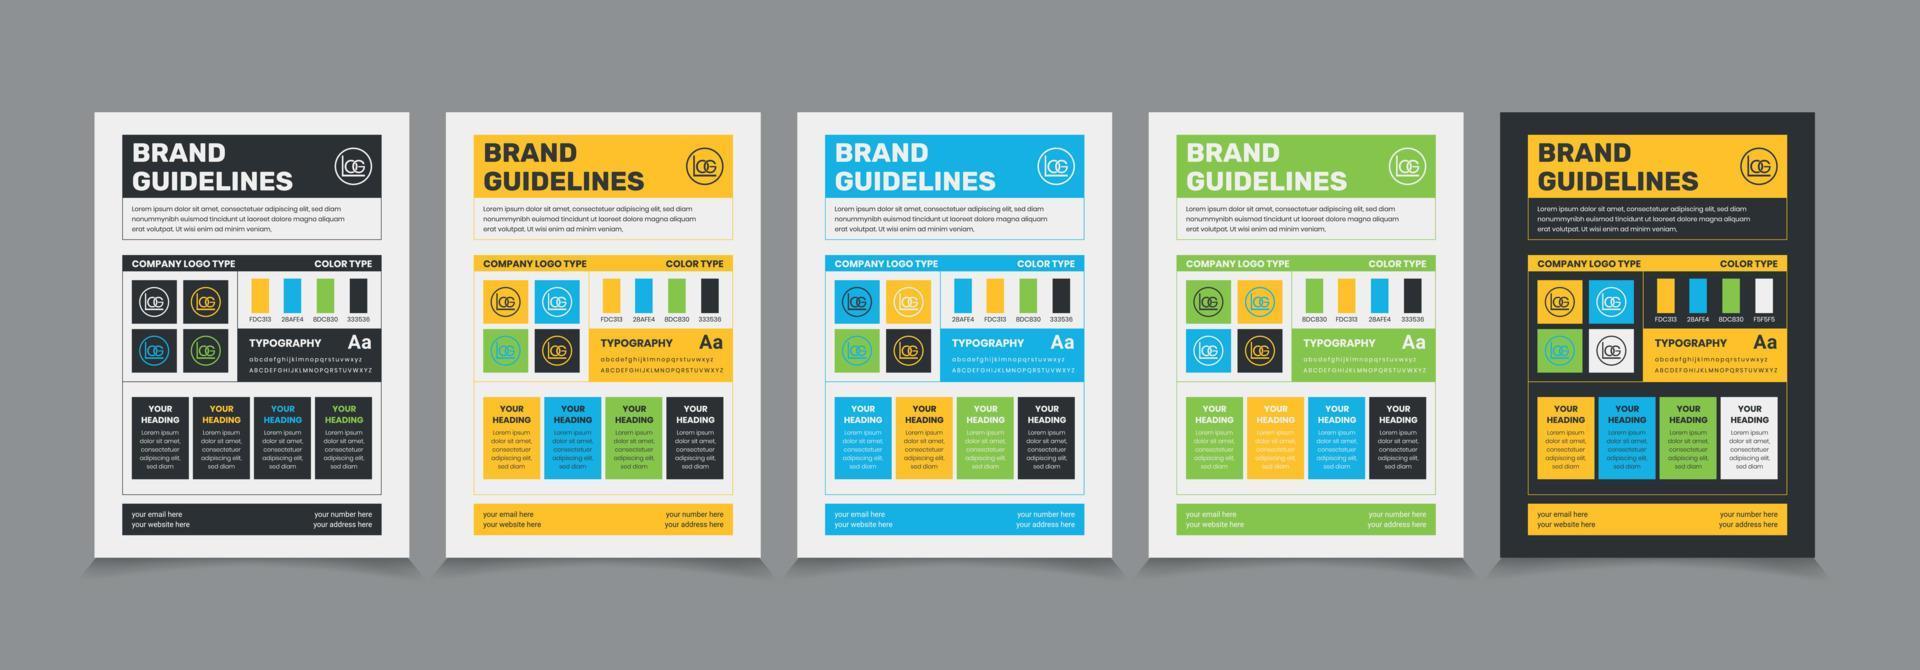 A4 Brand Guidelines Poster Layout Set, Simple style and modern Brand Guidelines, Brand identity Template. vector